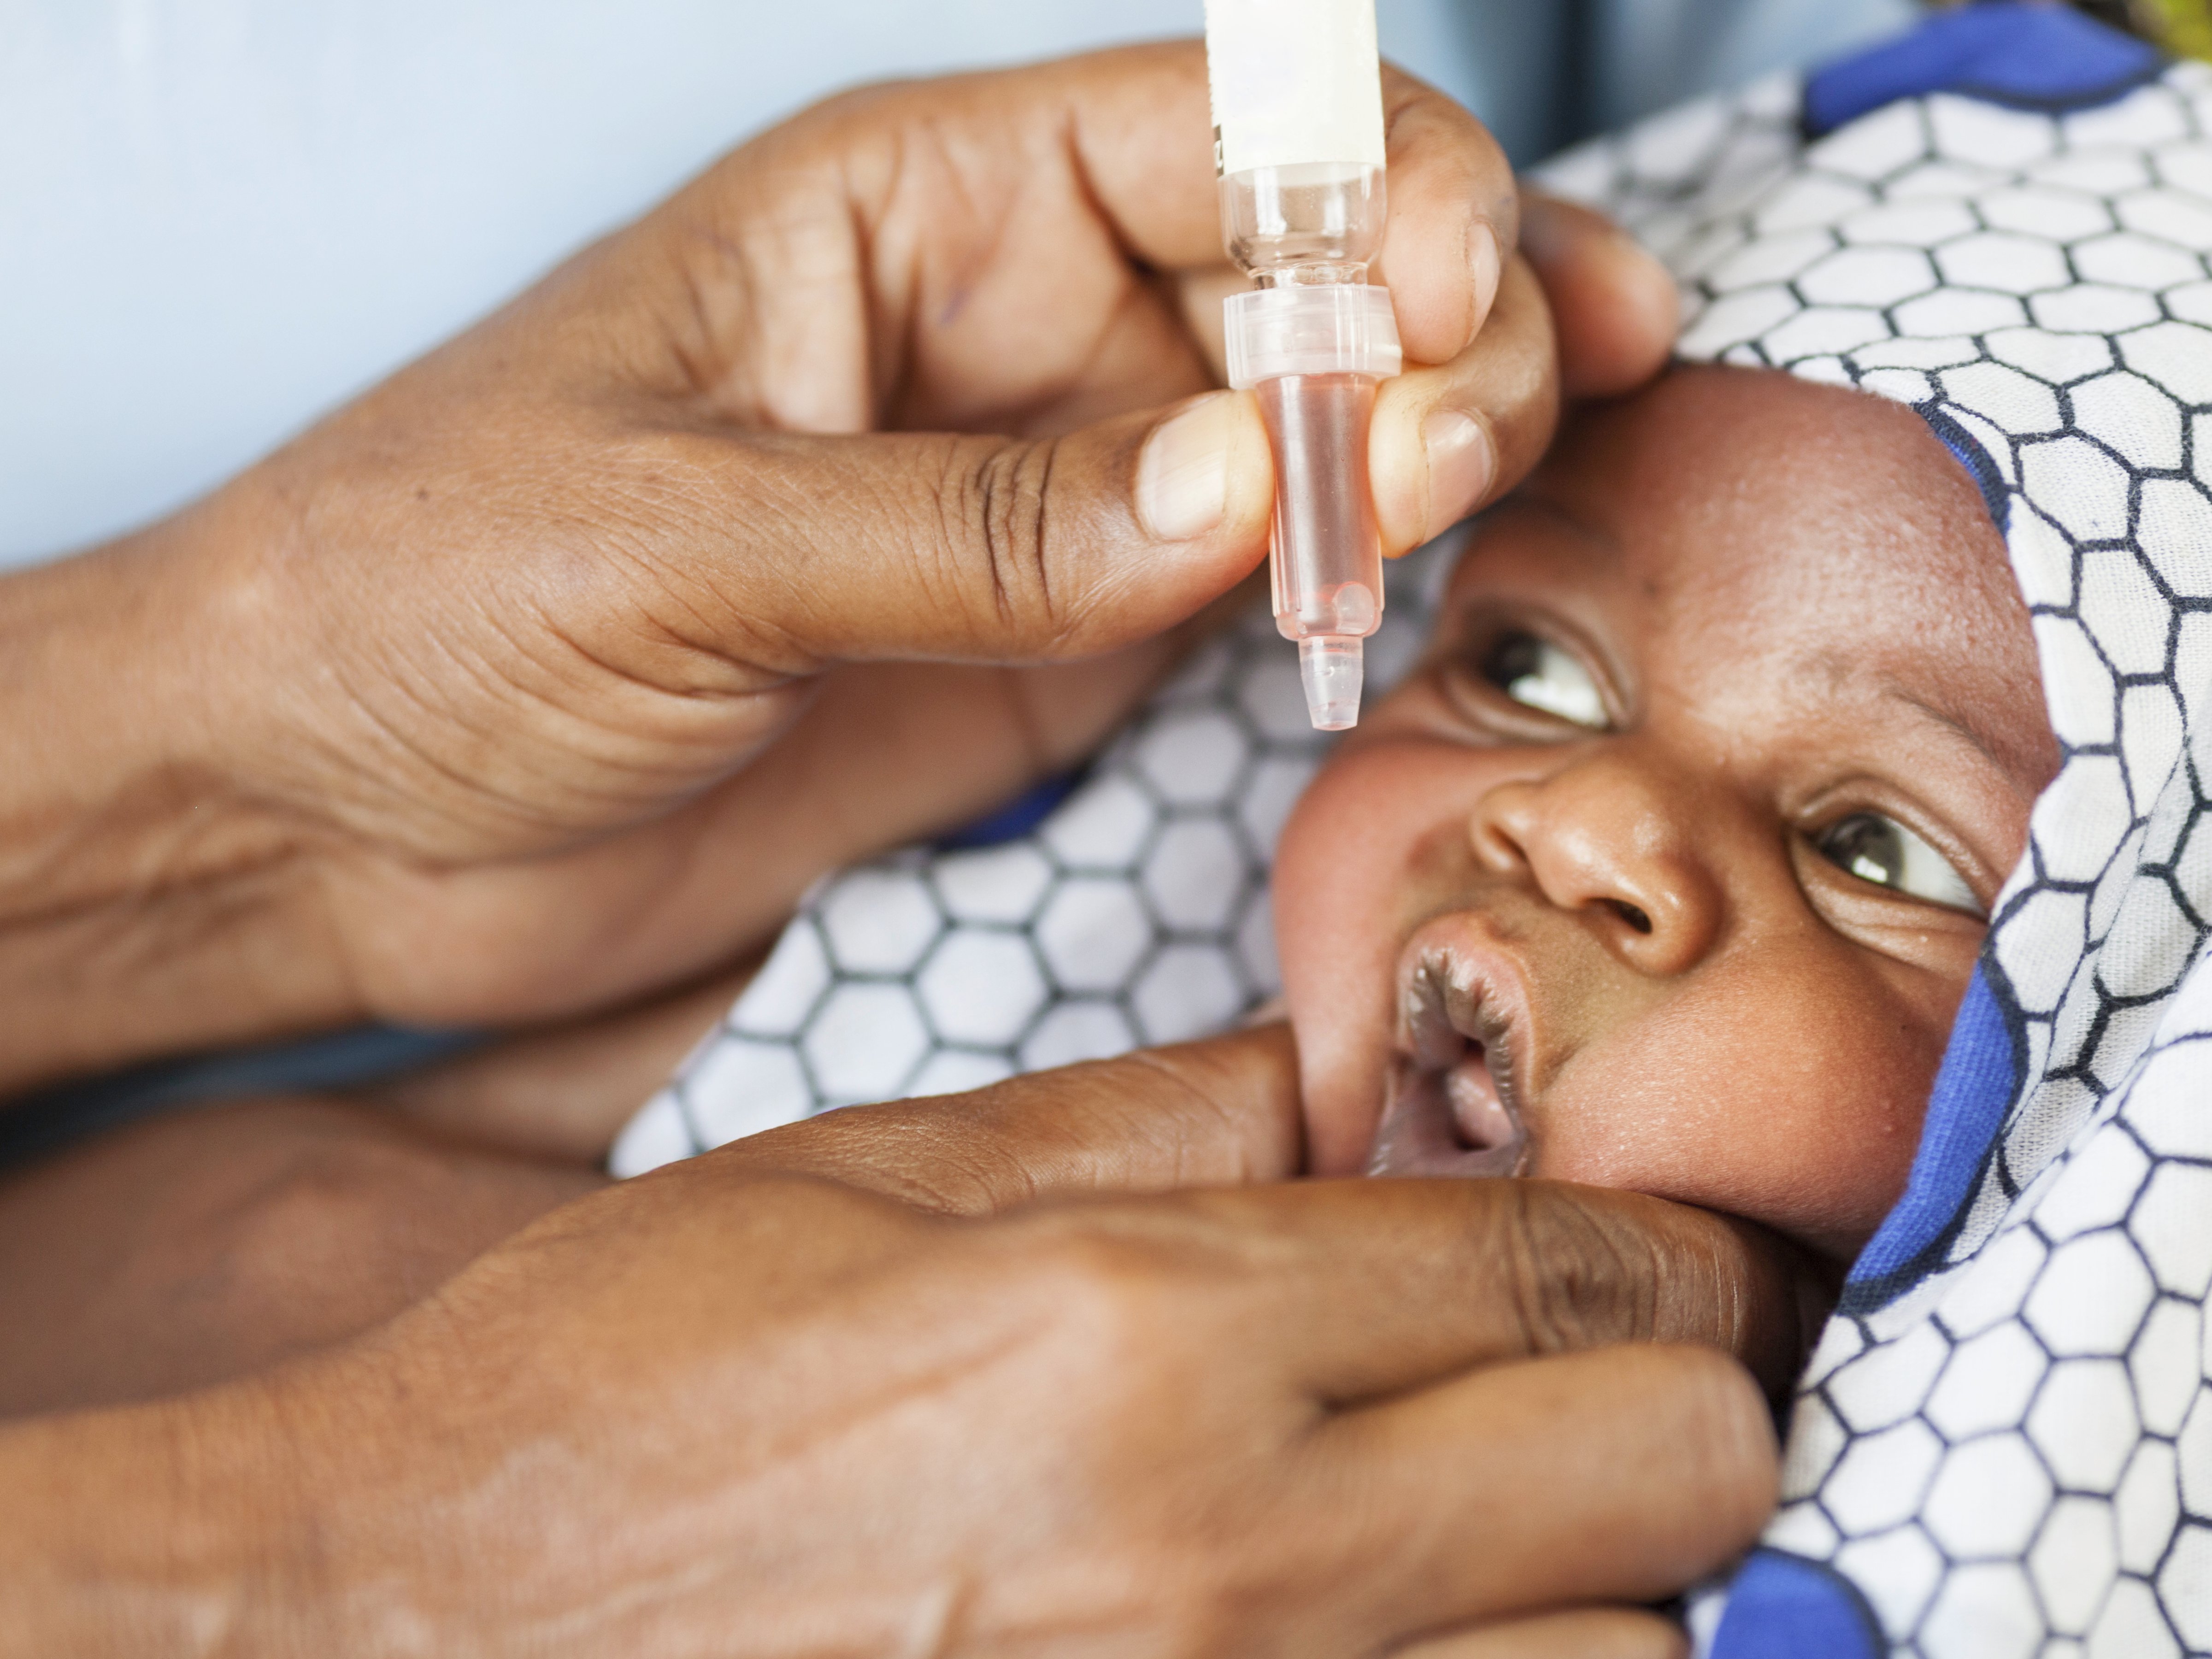 Safe baby: a child in Africa receives an oral vaccine (ranplett; Getty Images/Vetta)